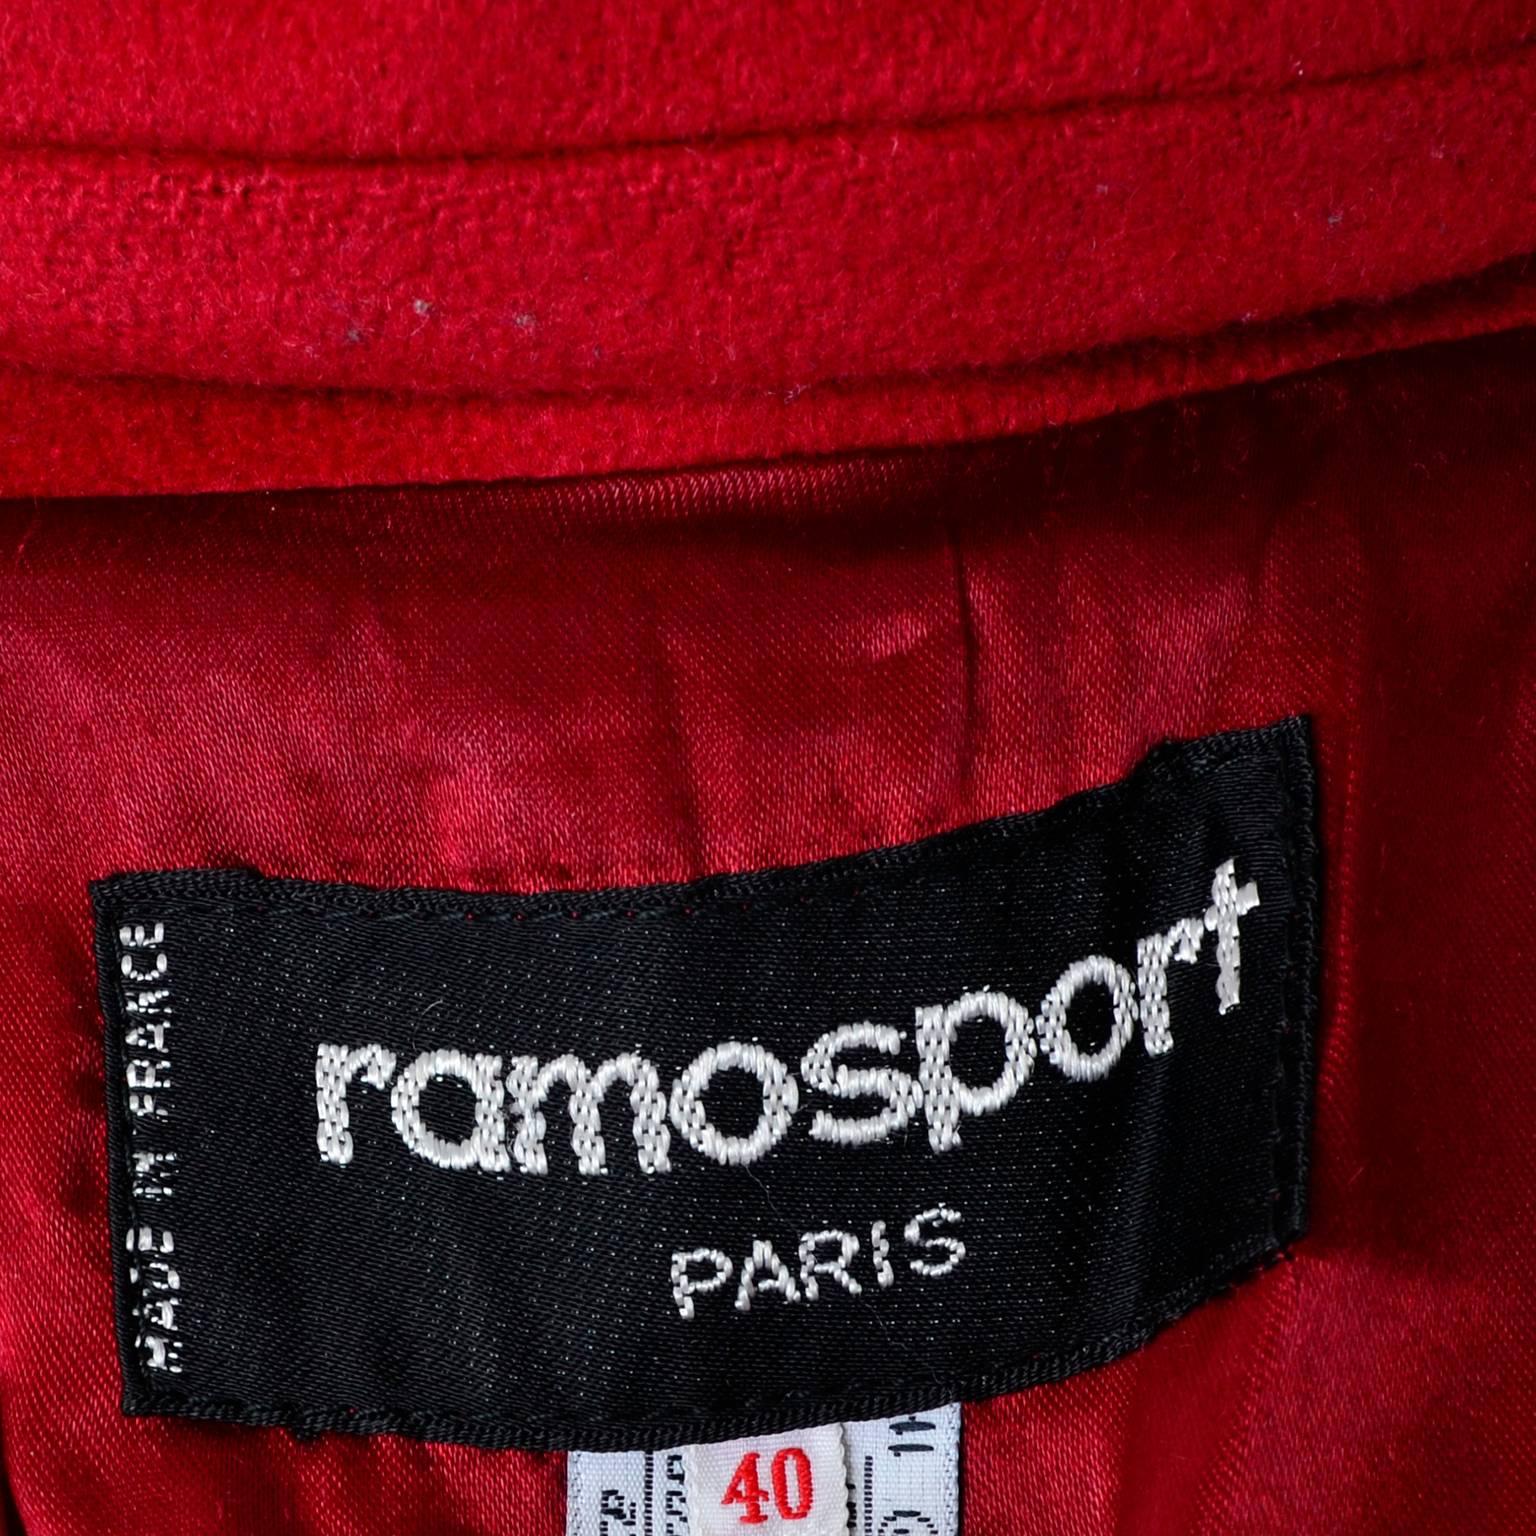 Ramosport Paris Vintage Red Wool Coat Made in France Size 40 or US 8/10 2